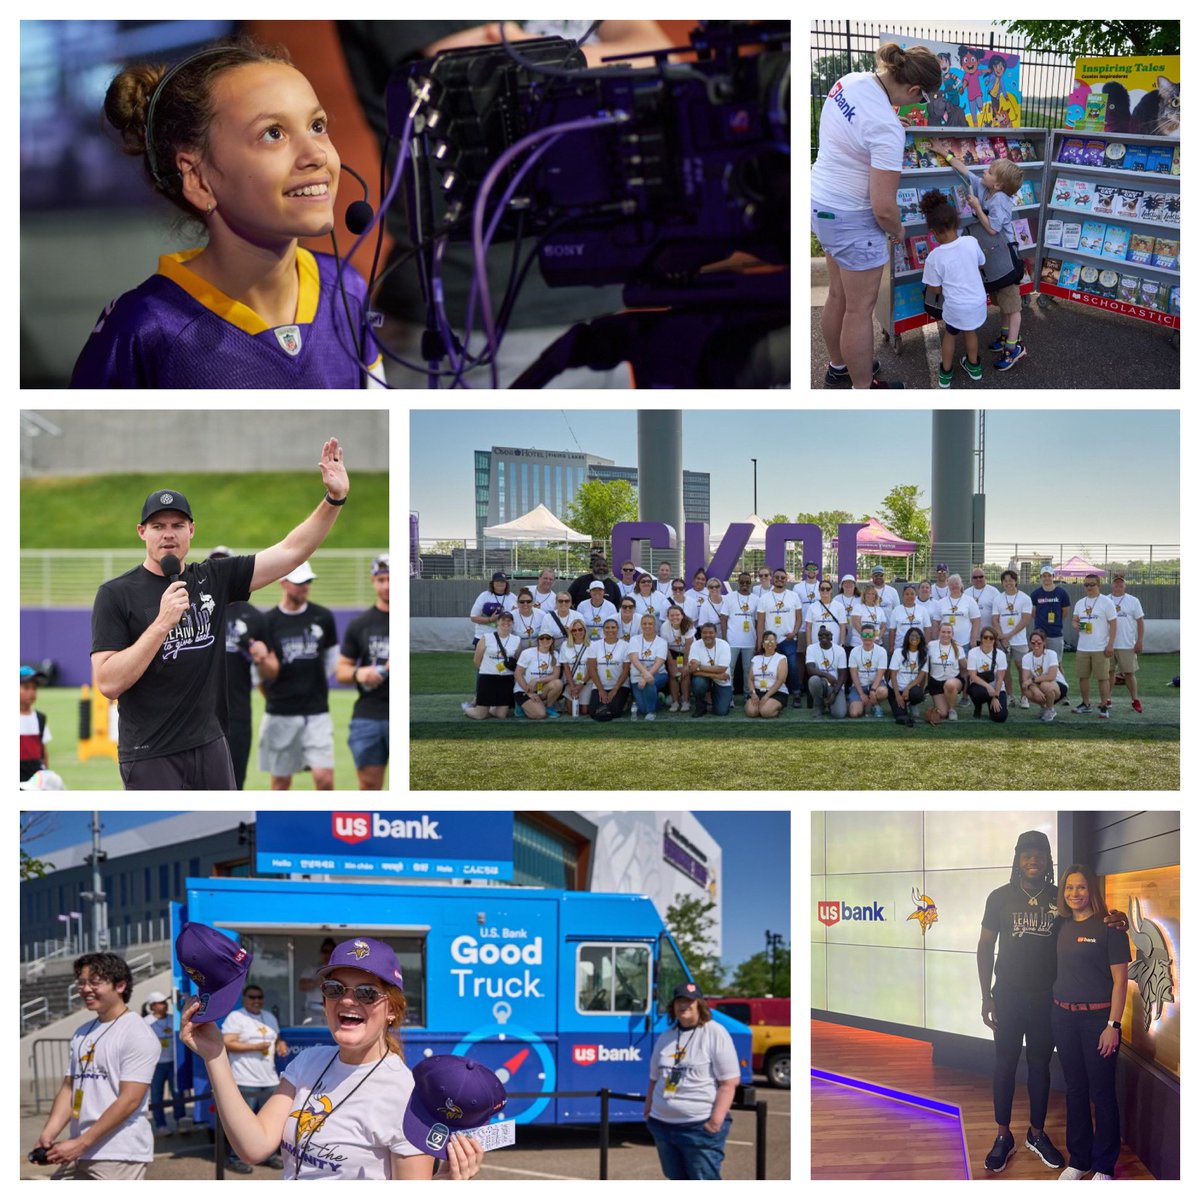 I had a blast joining @usbank volunteers and @Vikings players, coaches and staff for the Team Up to Give Back event this week. We encouraged students to dream big, work hard and get a jumpstart on their summer reading goals by choosing books to take home#CommunityPossible